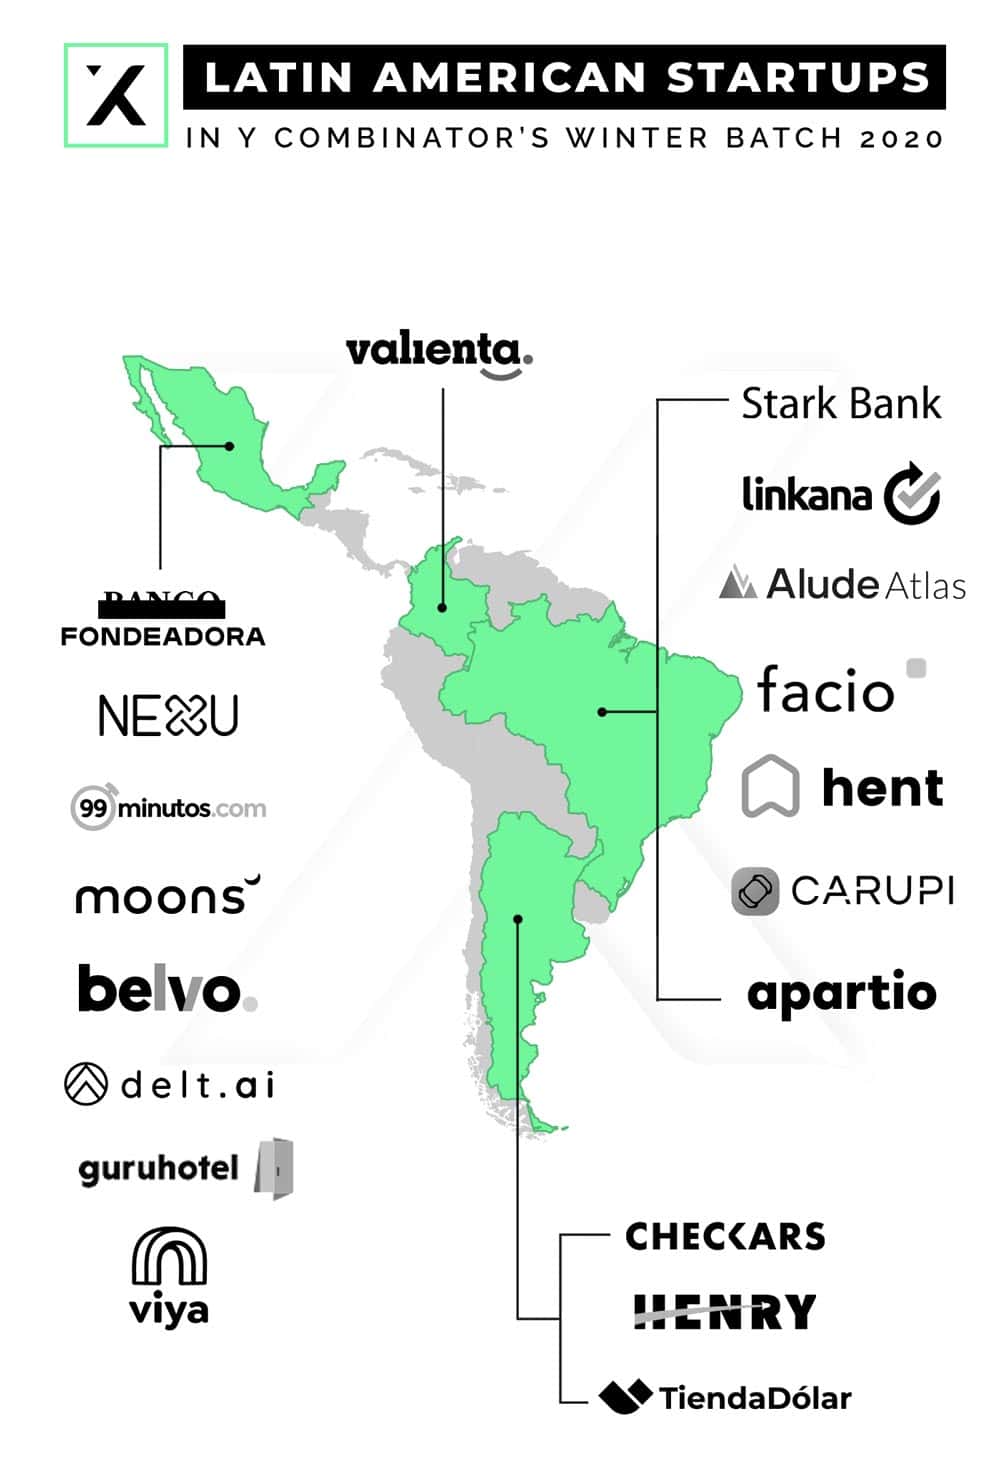 Latin American Show-stealing Startups In Y Combinator’s Winter Batch 2020